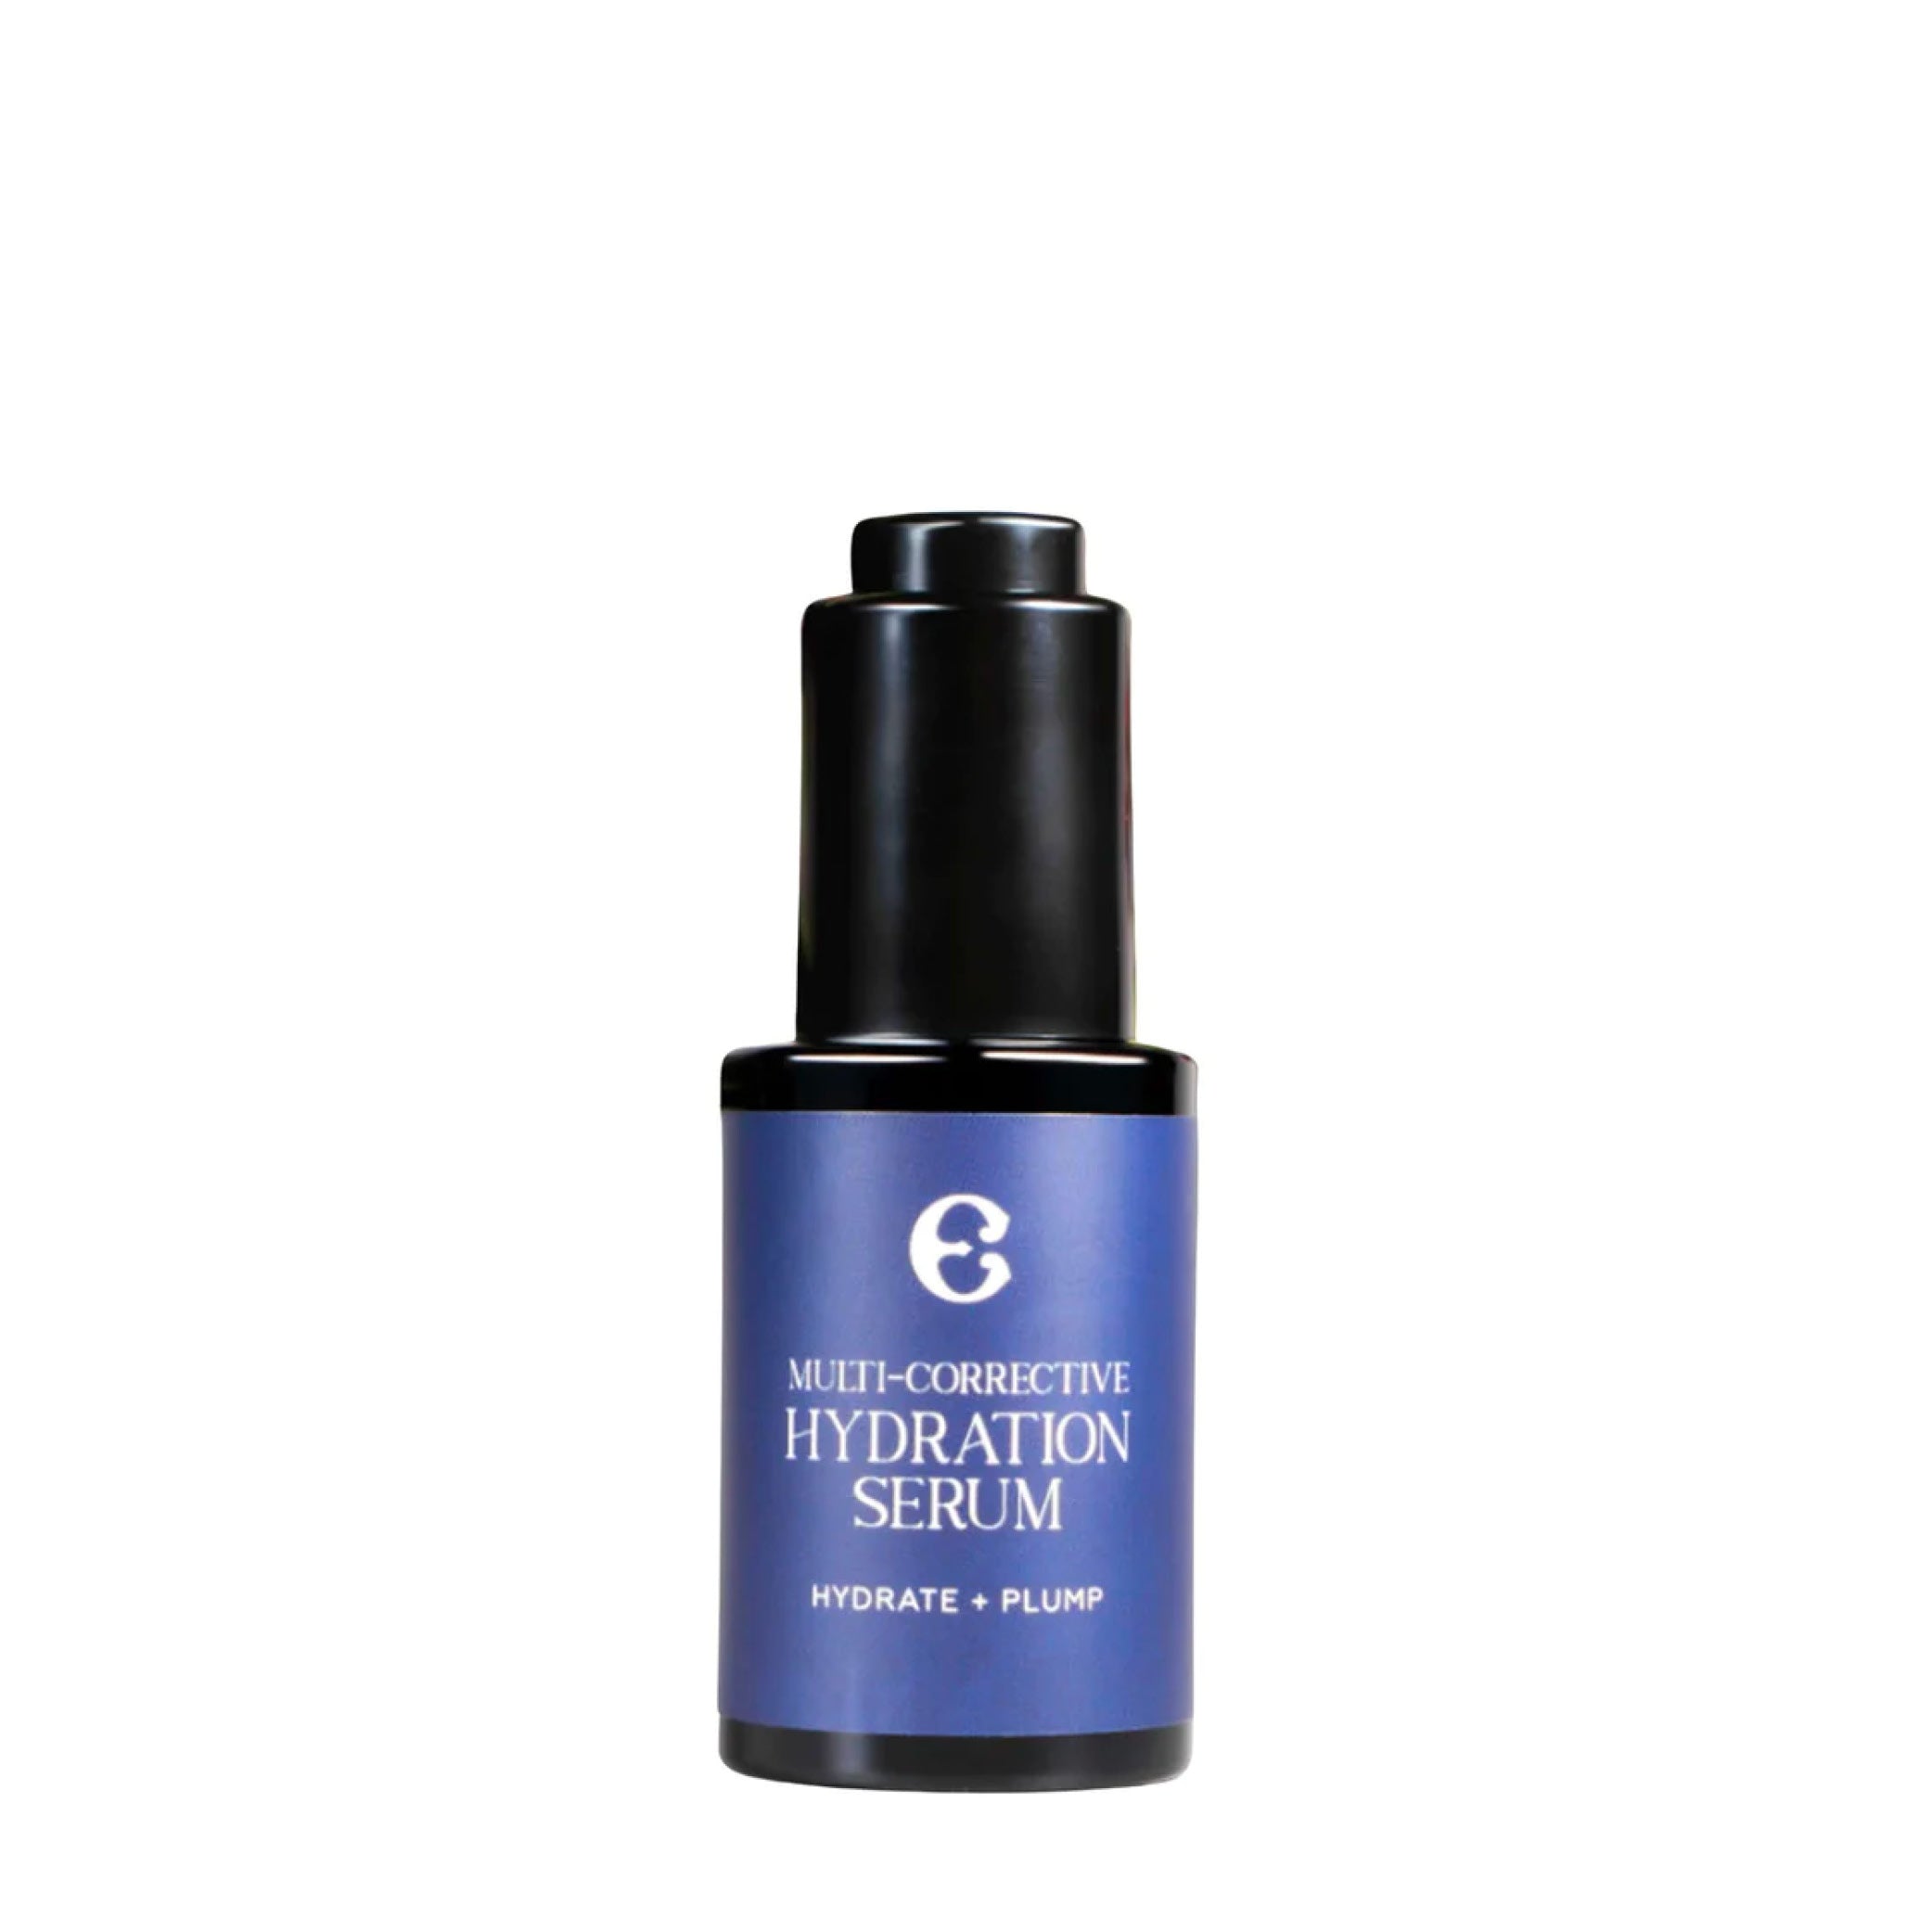 Multi-Corrective Hydration Serum (New Packaging)